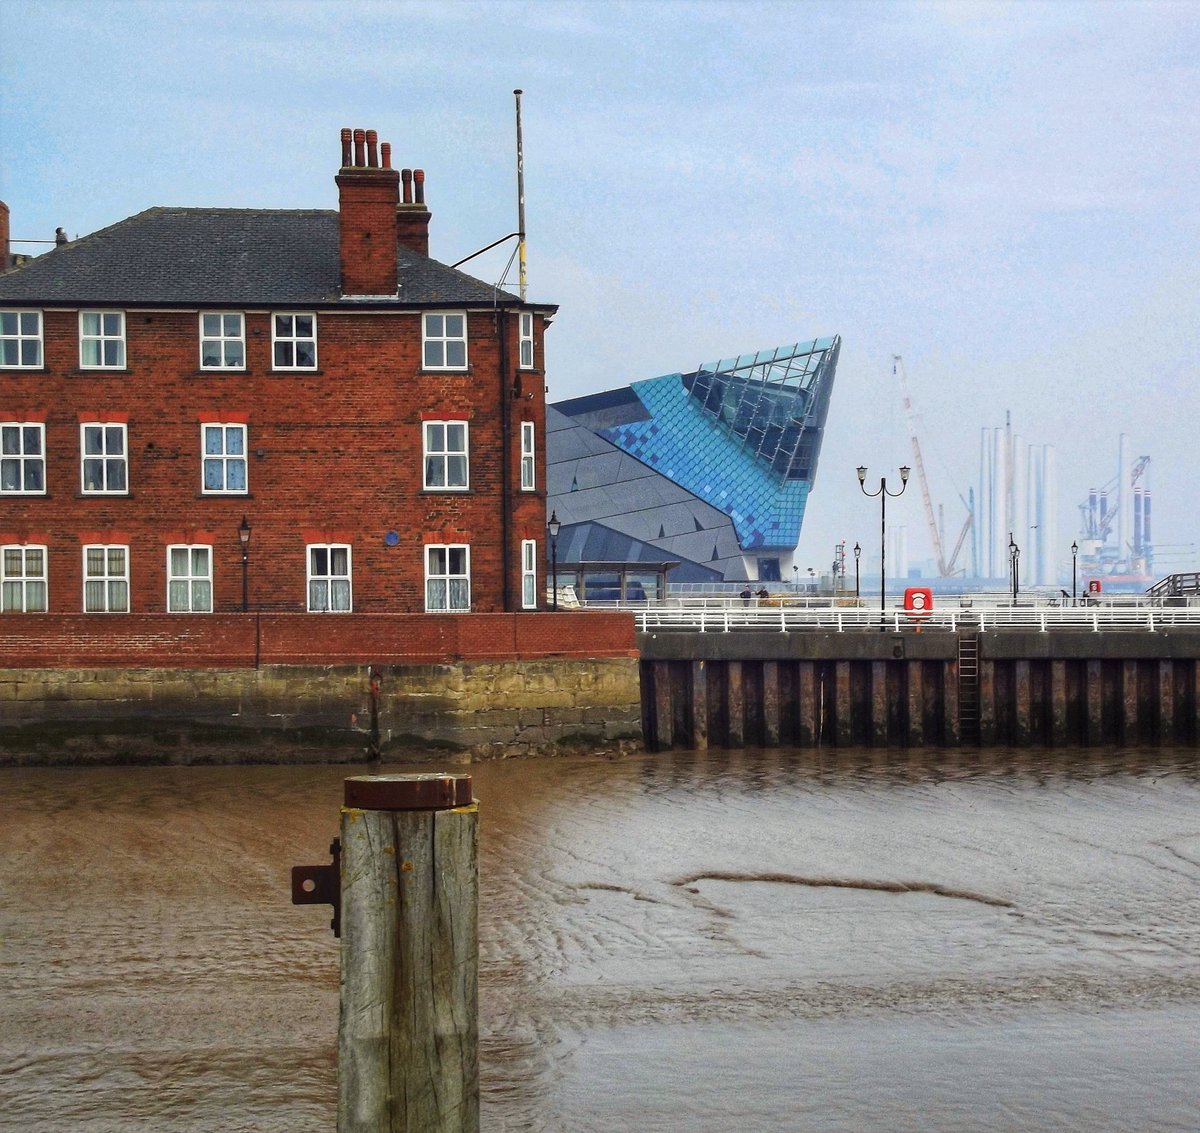 Contrasting architecture near the Marina. The former Water Guard Office on the left and @TheDeepHull on the right. #hull #yorkshire #travel #architecture